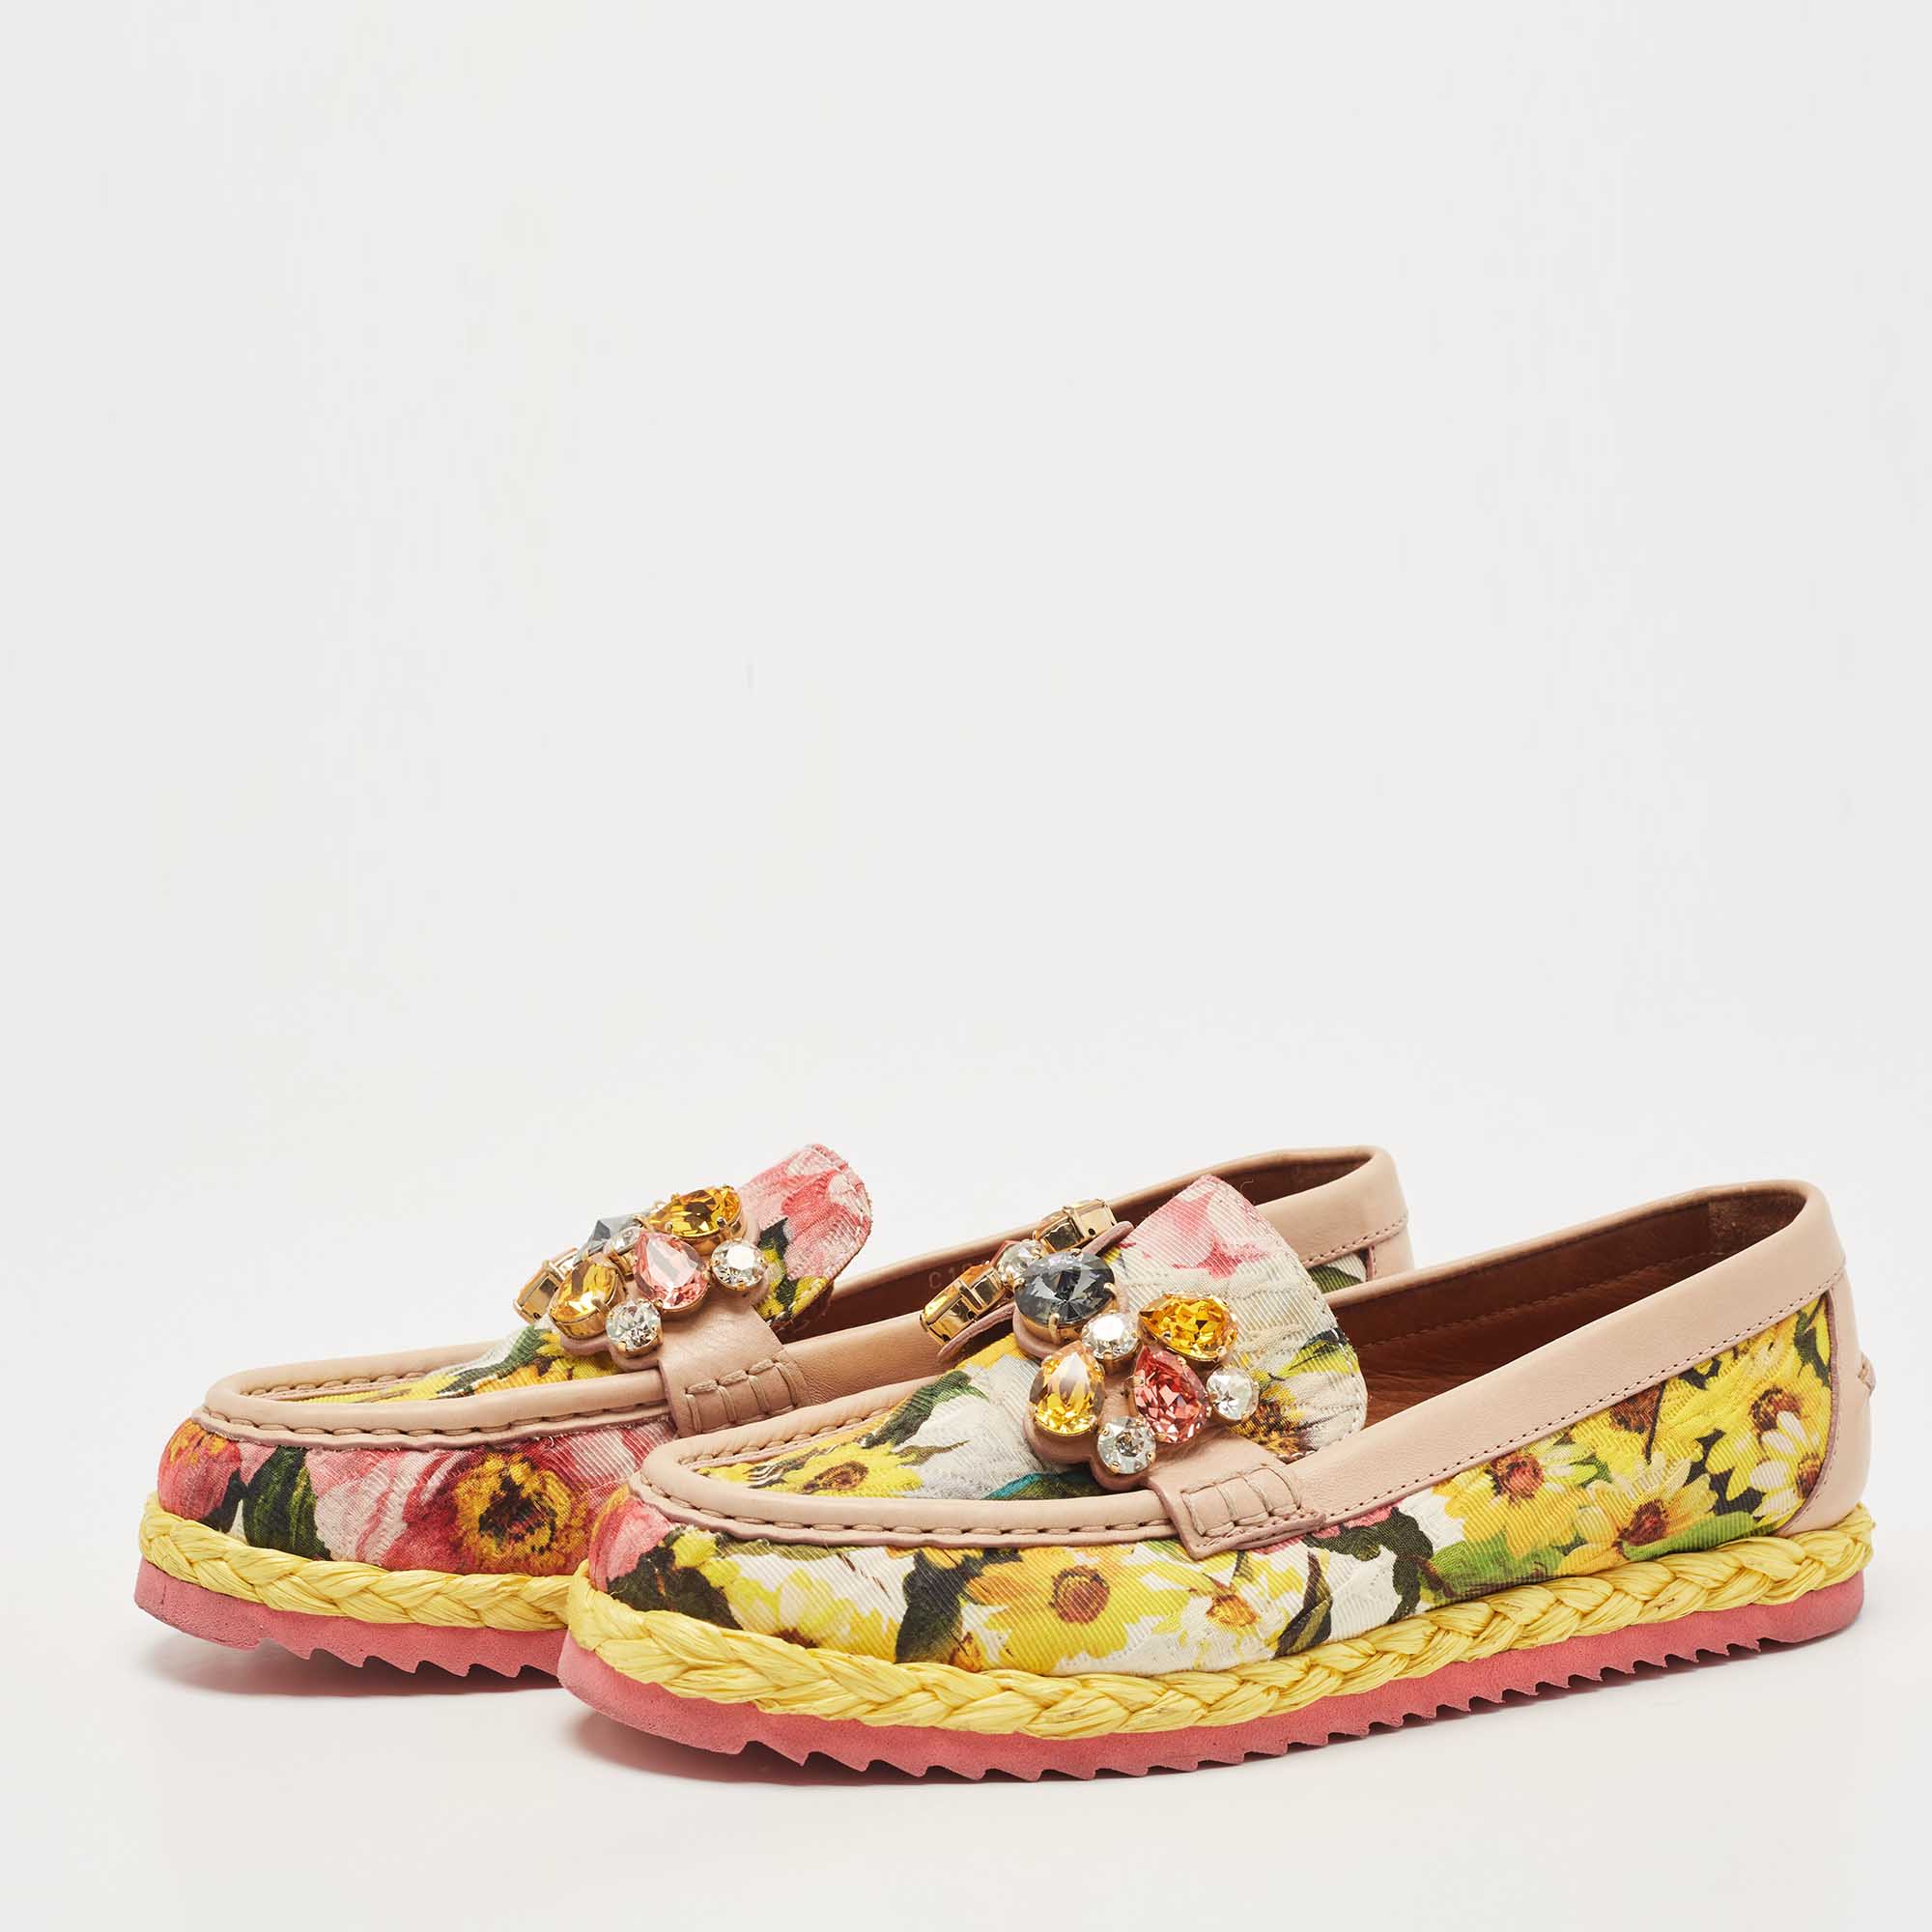 

Dolce & Gabbana Multicolor Brocade Fabric And Leather Crystal Embellished Espadrille Loafers Size